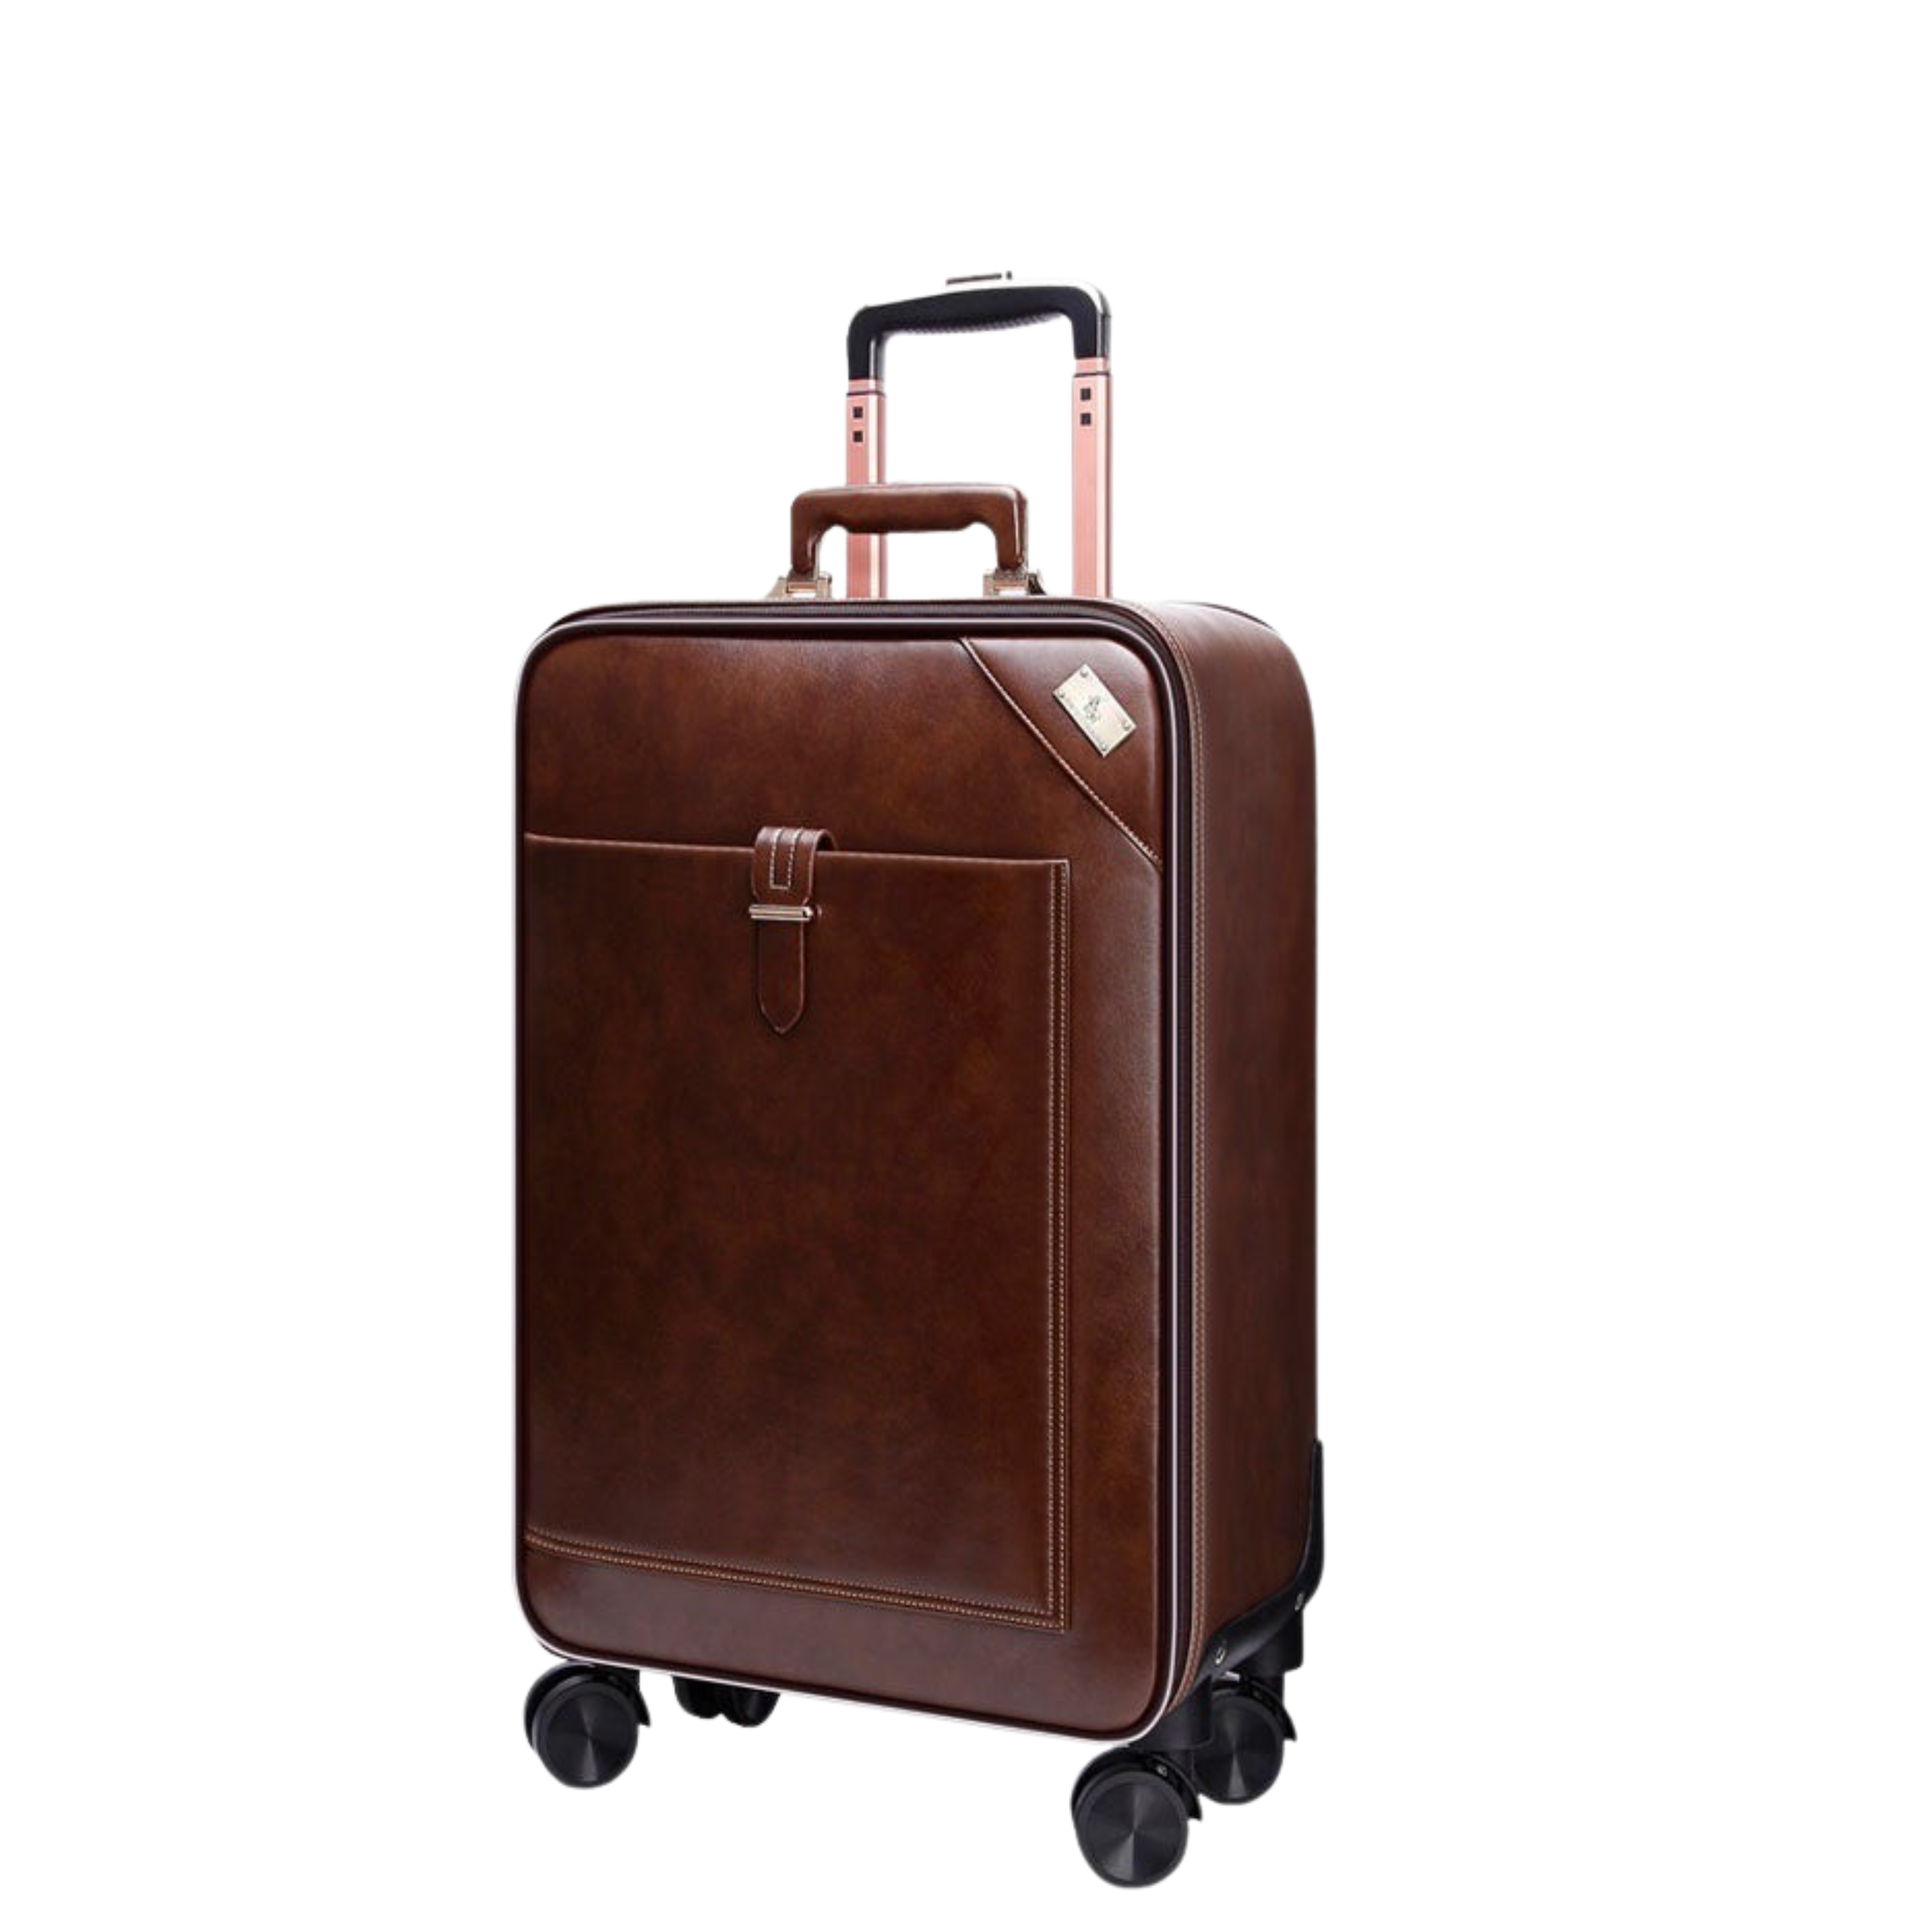 SEMMS BROWN LUXURIOUS LEATHER LUGGAGE